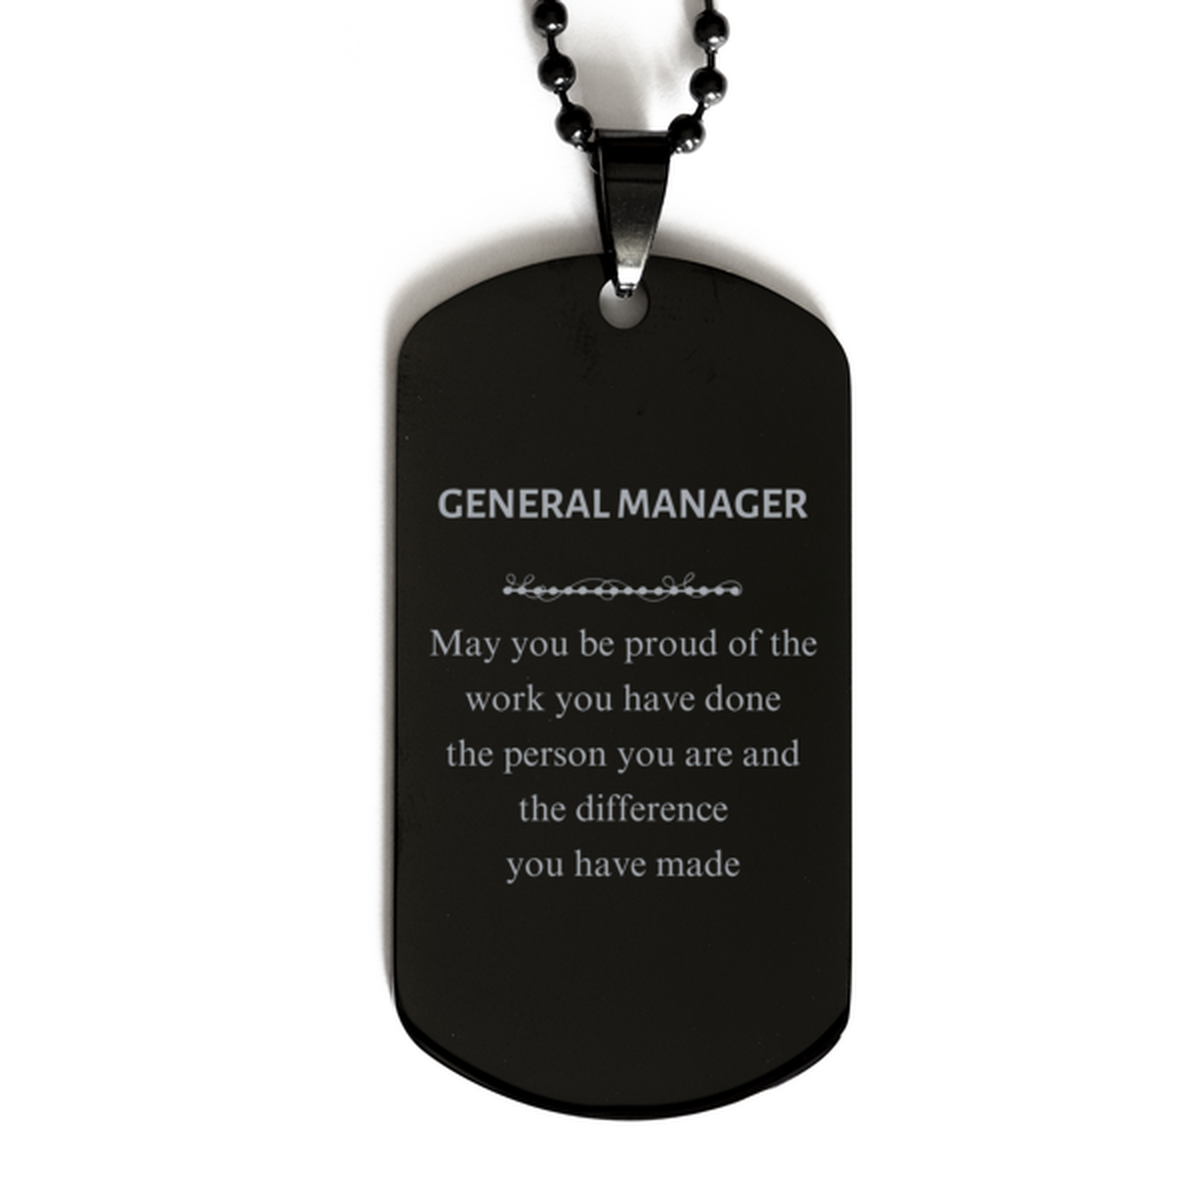 General Manager May you be proud of the work you have done, Retirement General Manager Black Dog Tag for Colleague Appreciation Gifts Amazing for General Manager